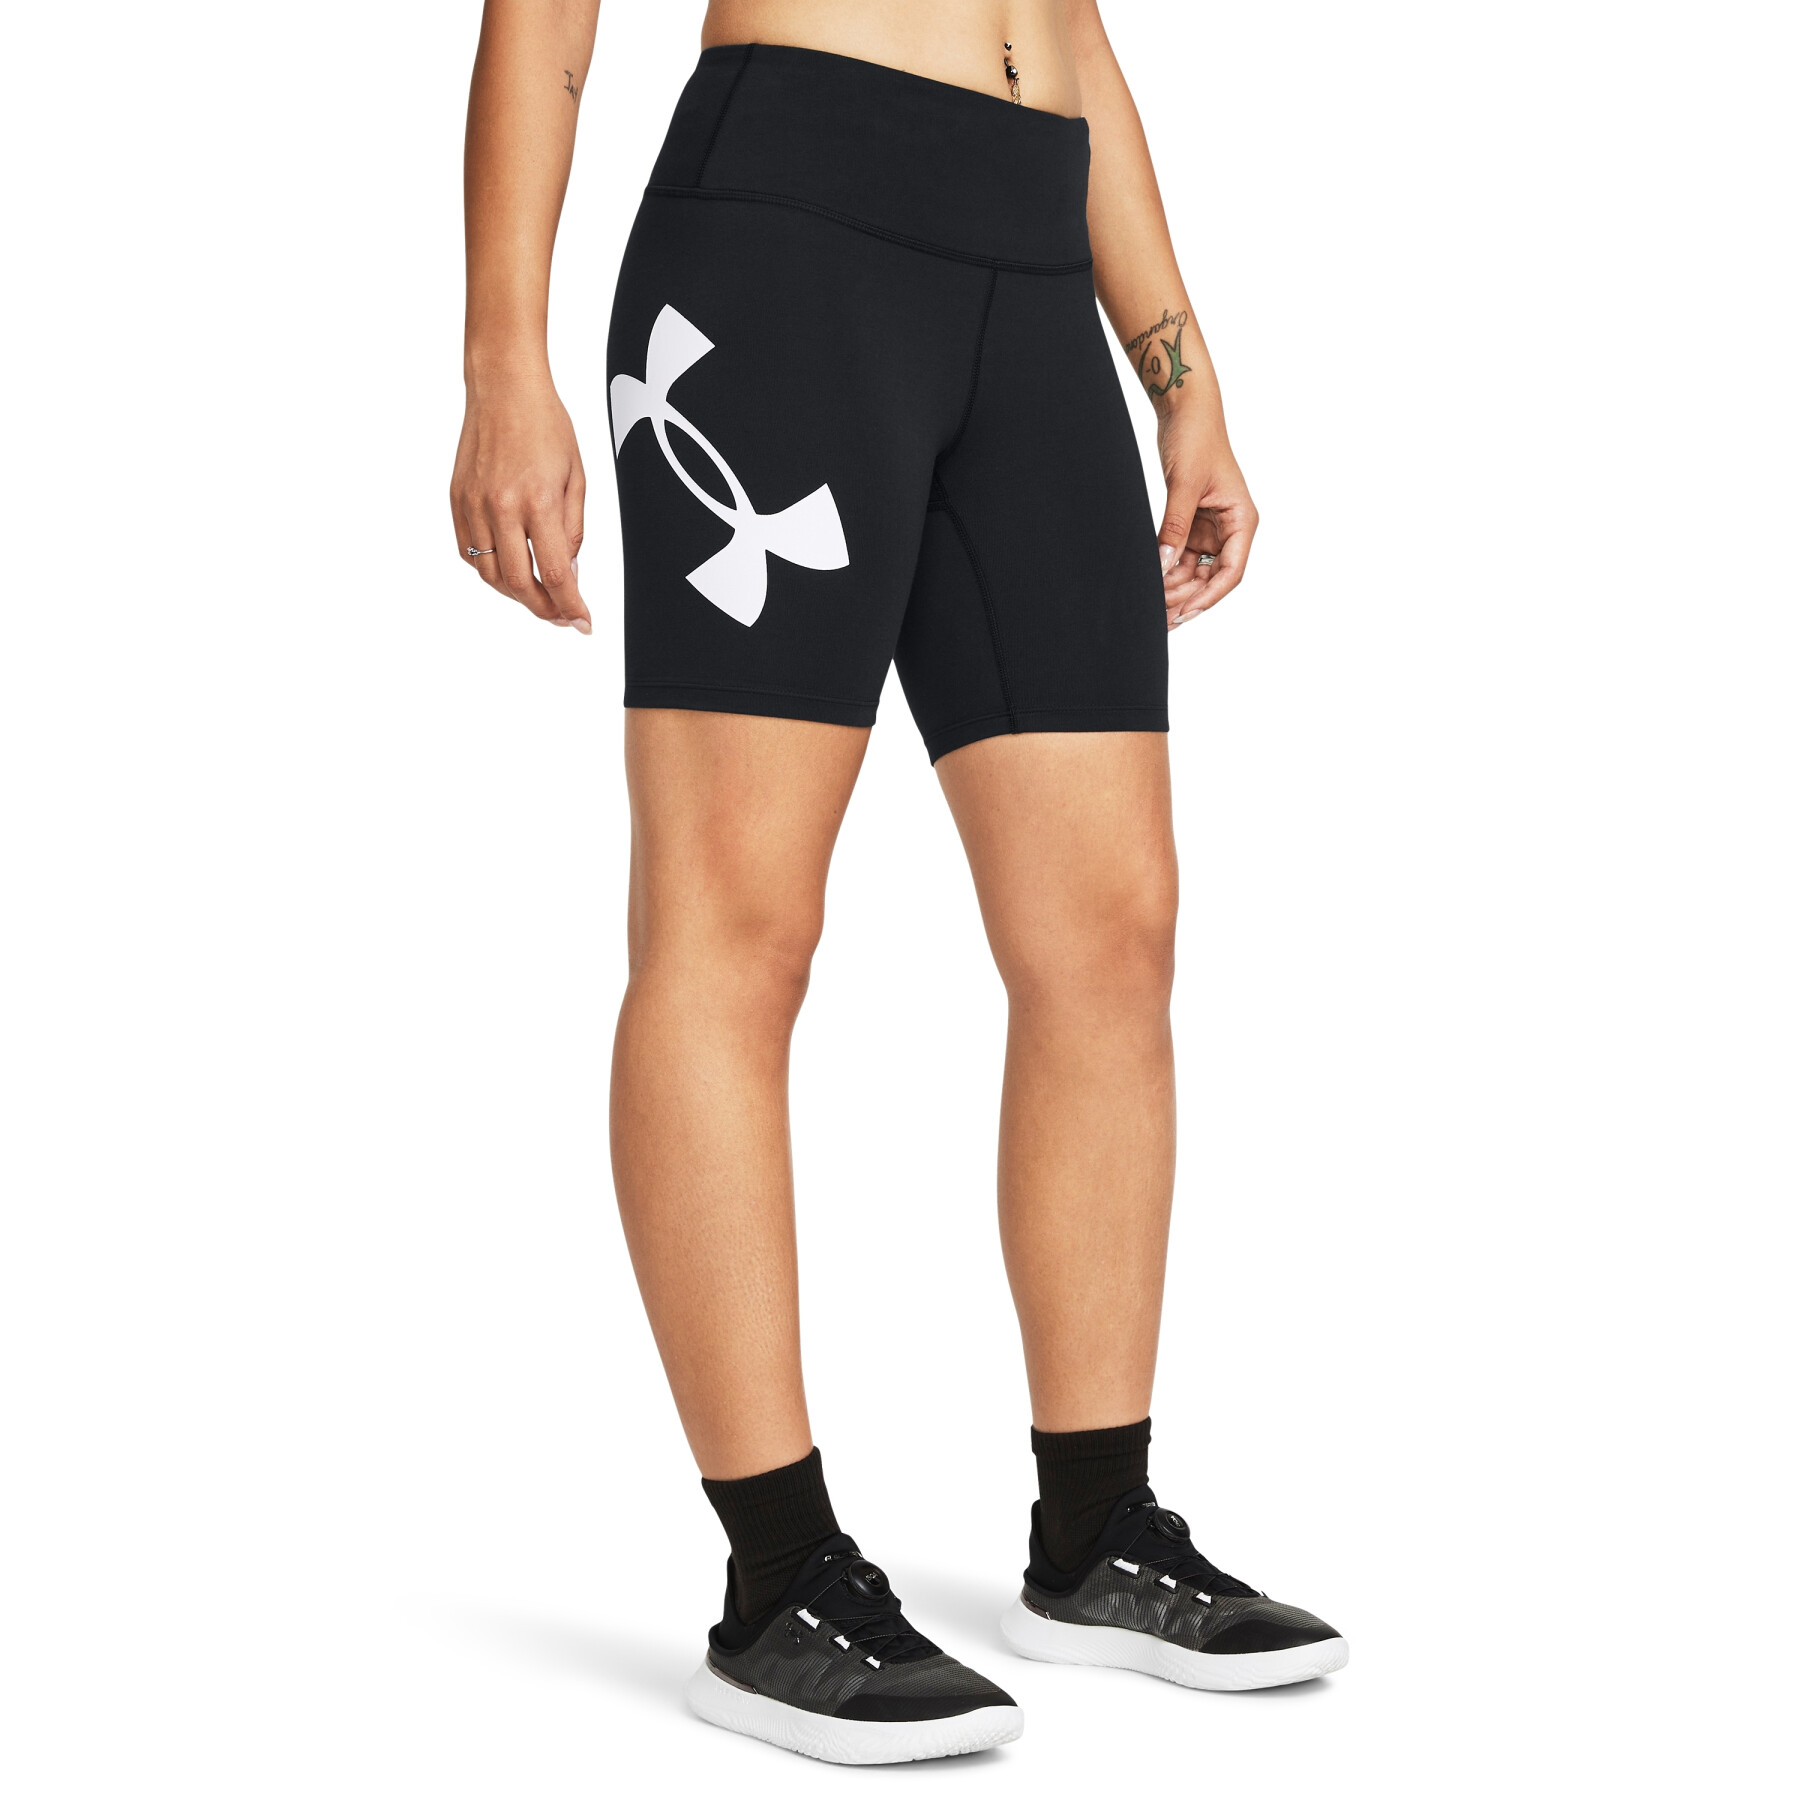 Women's thigh-high boots Under Armour Campus 7"